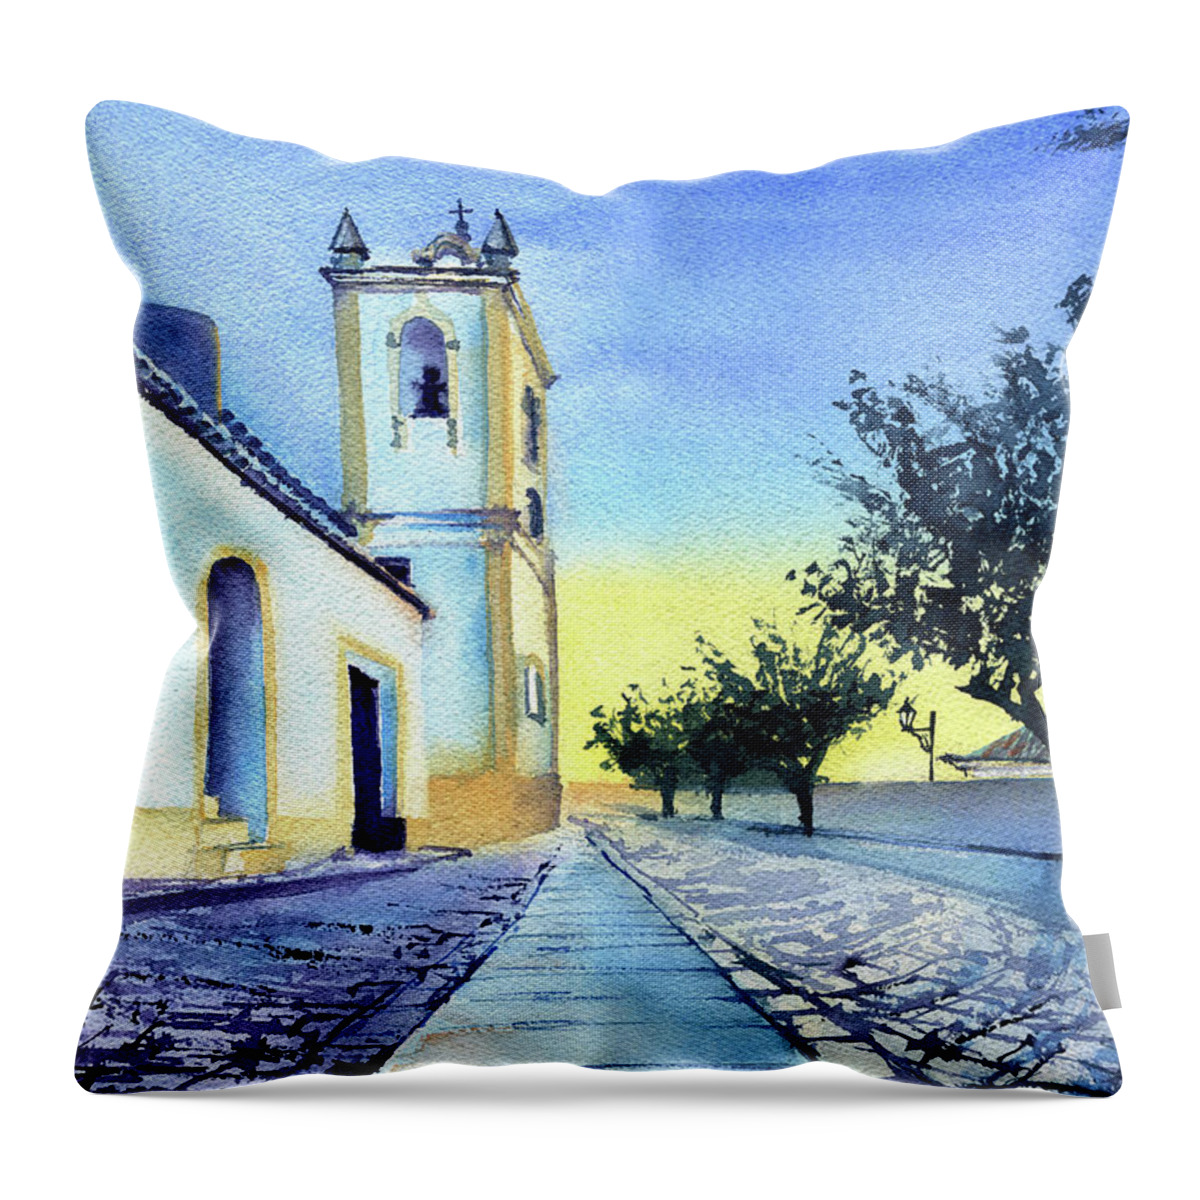 Portugal Throw Pillow featuring the painting Ferragudo Church Algarve Portugal by Dora Hathazi Mendes